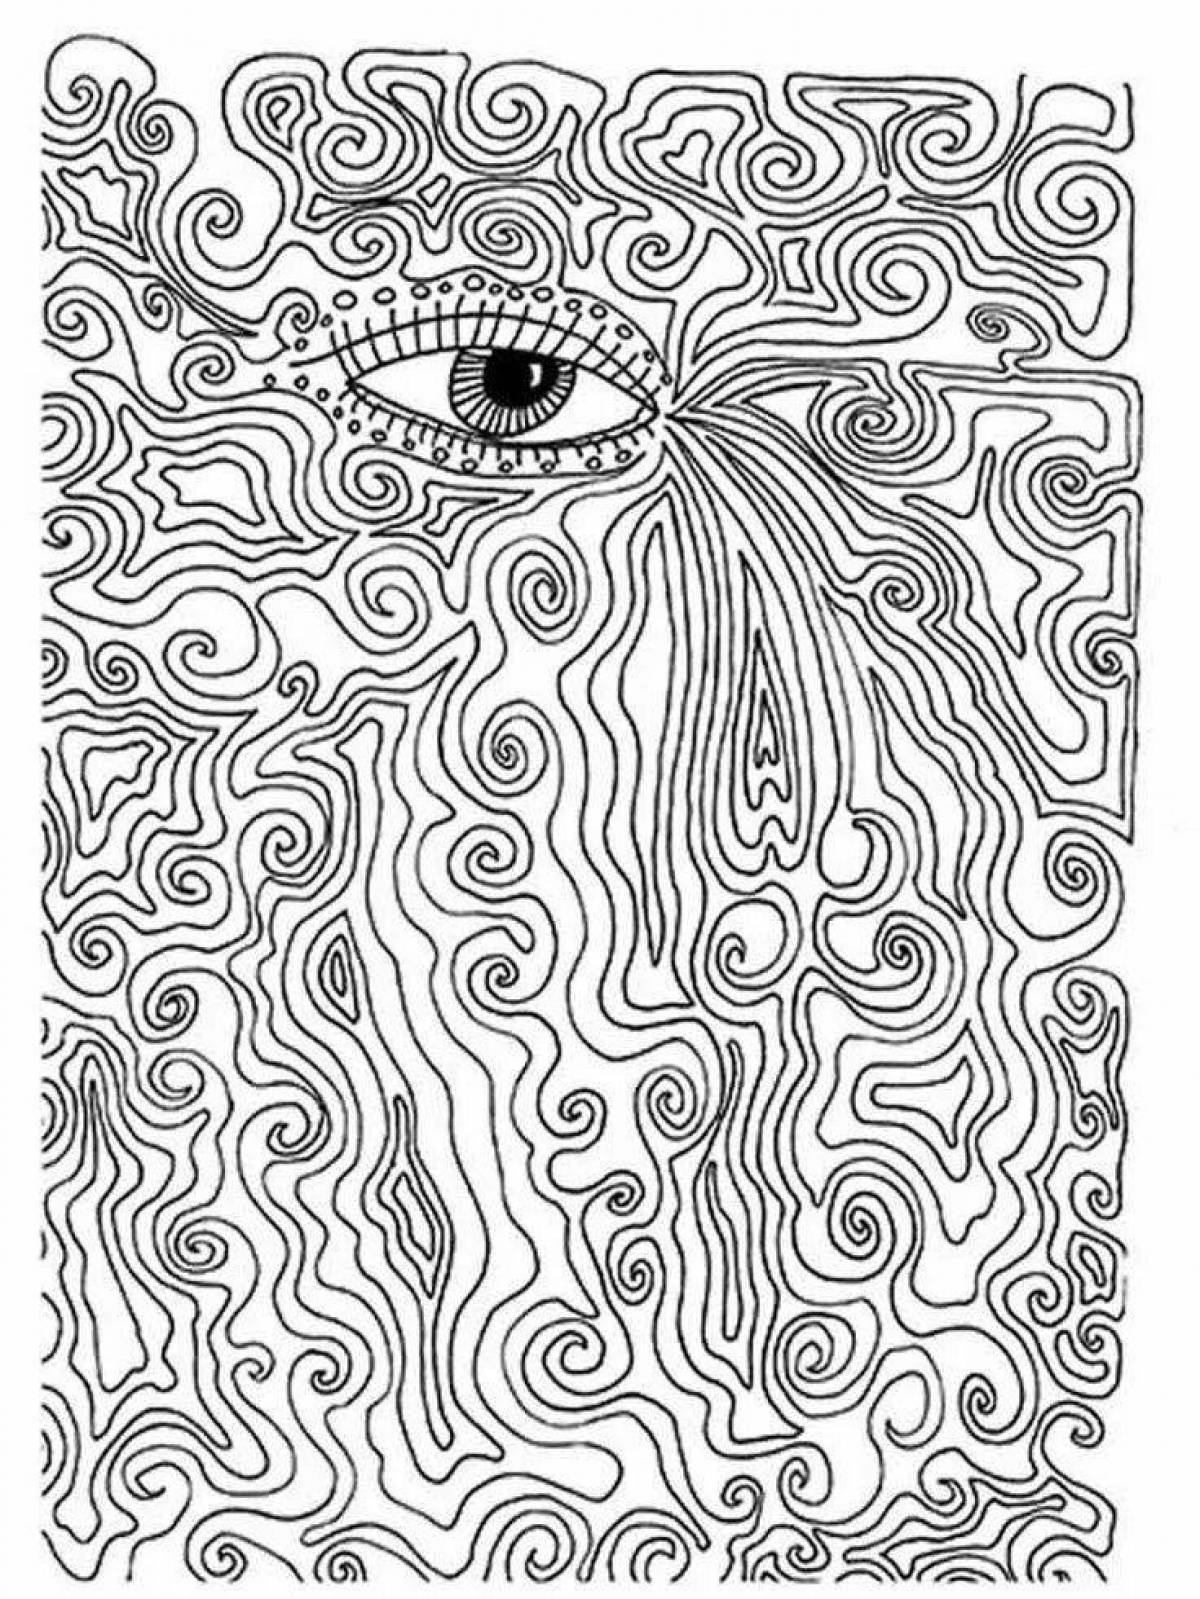 Fancy psychedelic coloring book